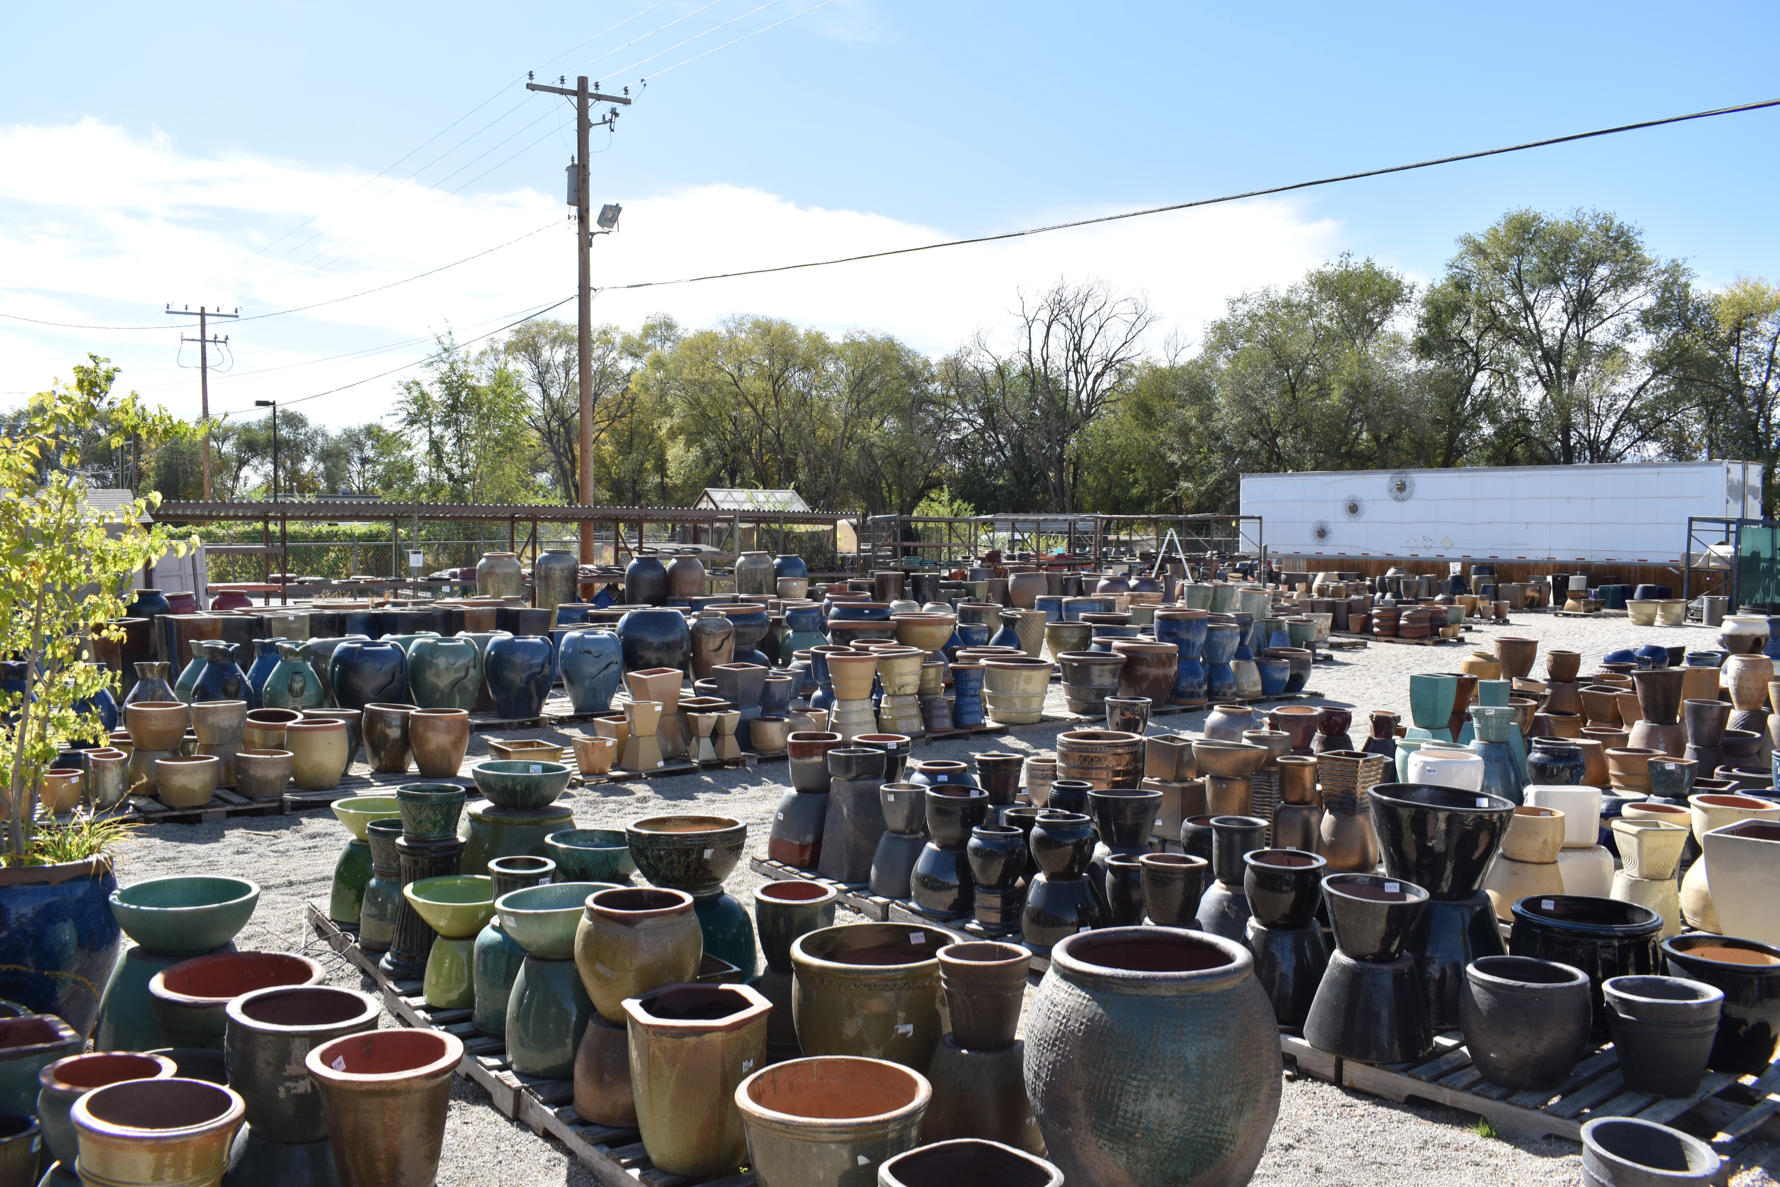 hundreds of ceramic pots stacked on pallets in our sandy retail lot